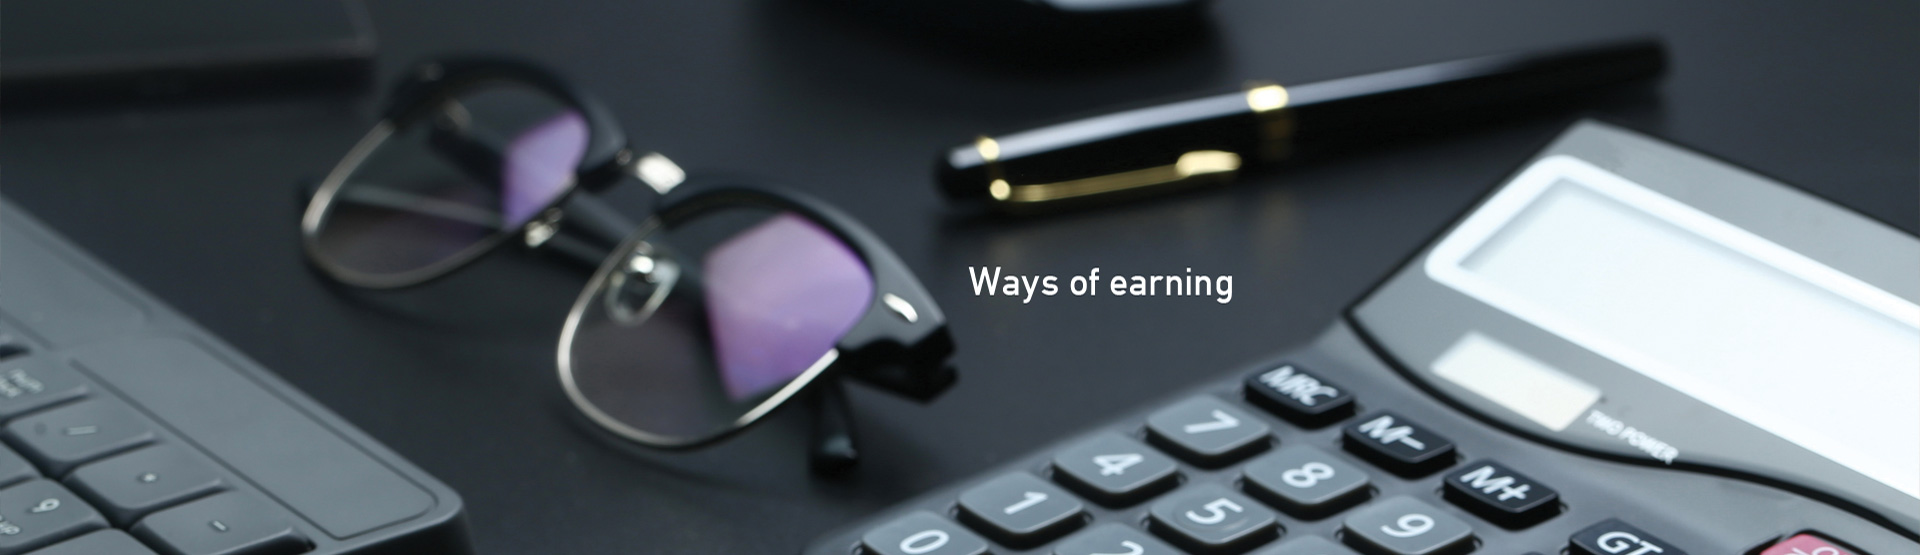 ways-of-earning-banner